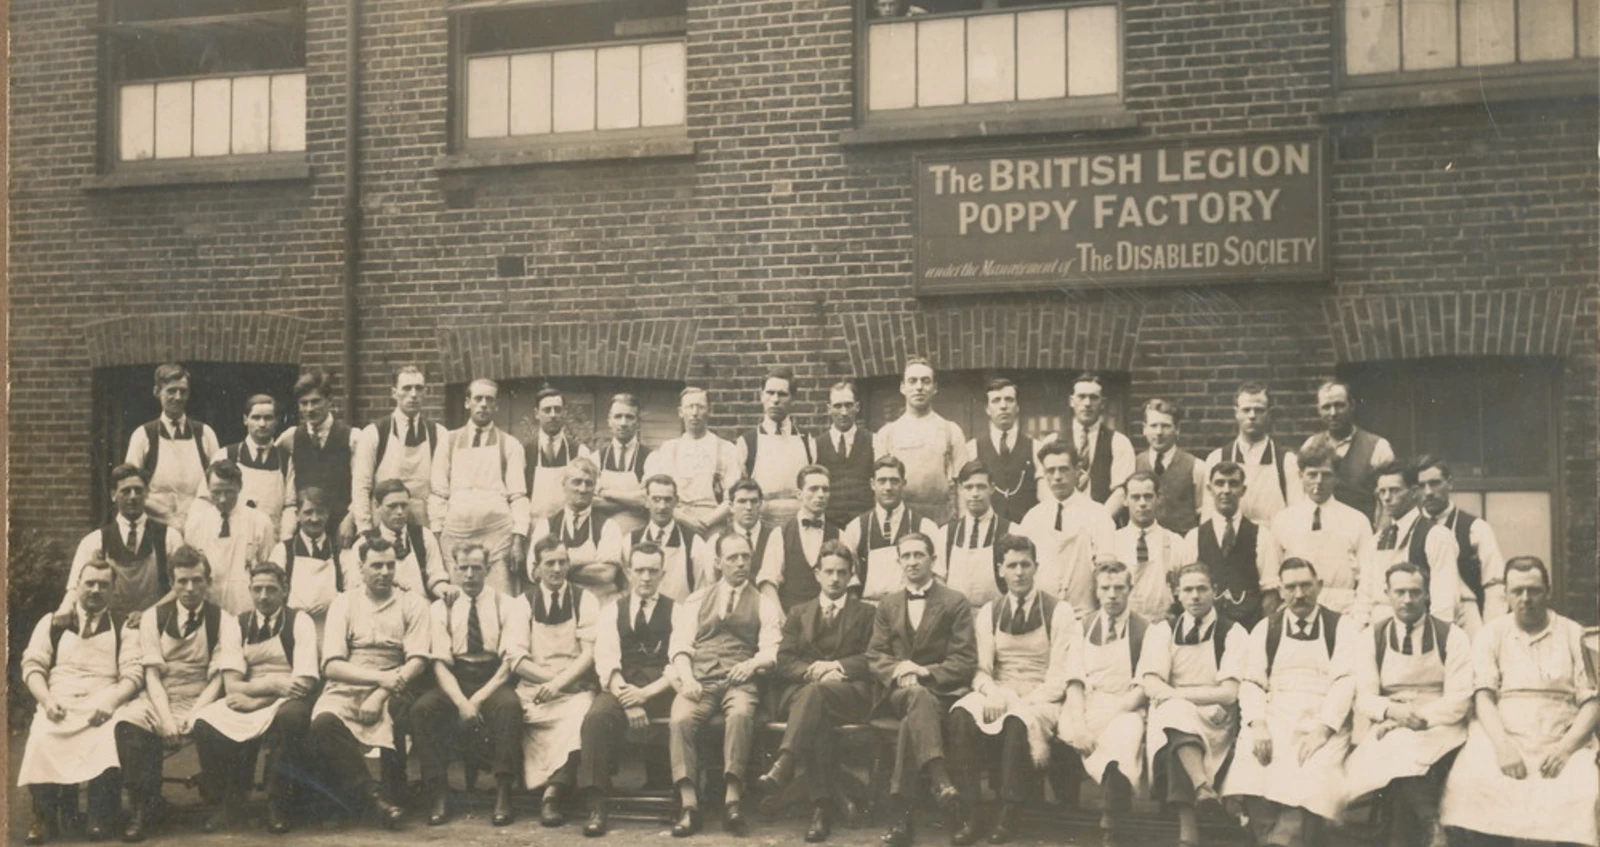 Workers outside the Poppy factory